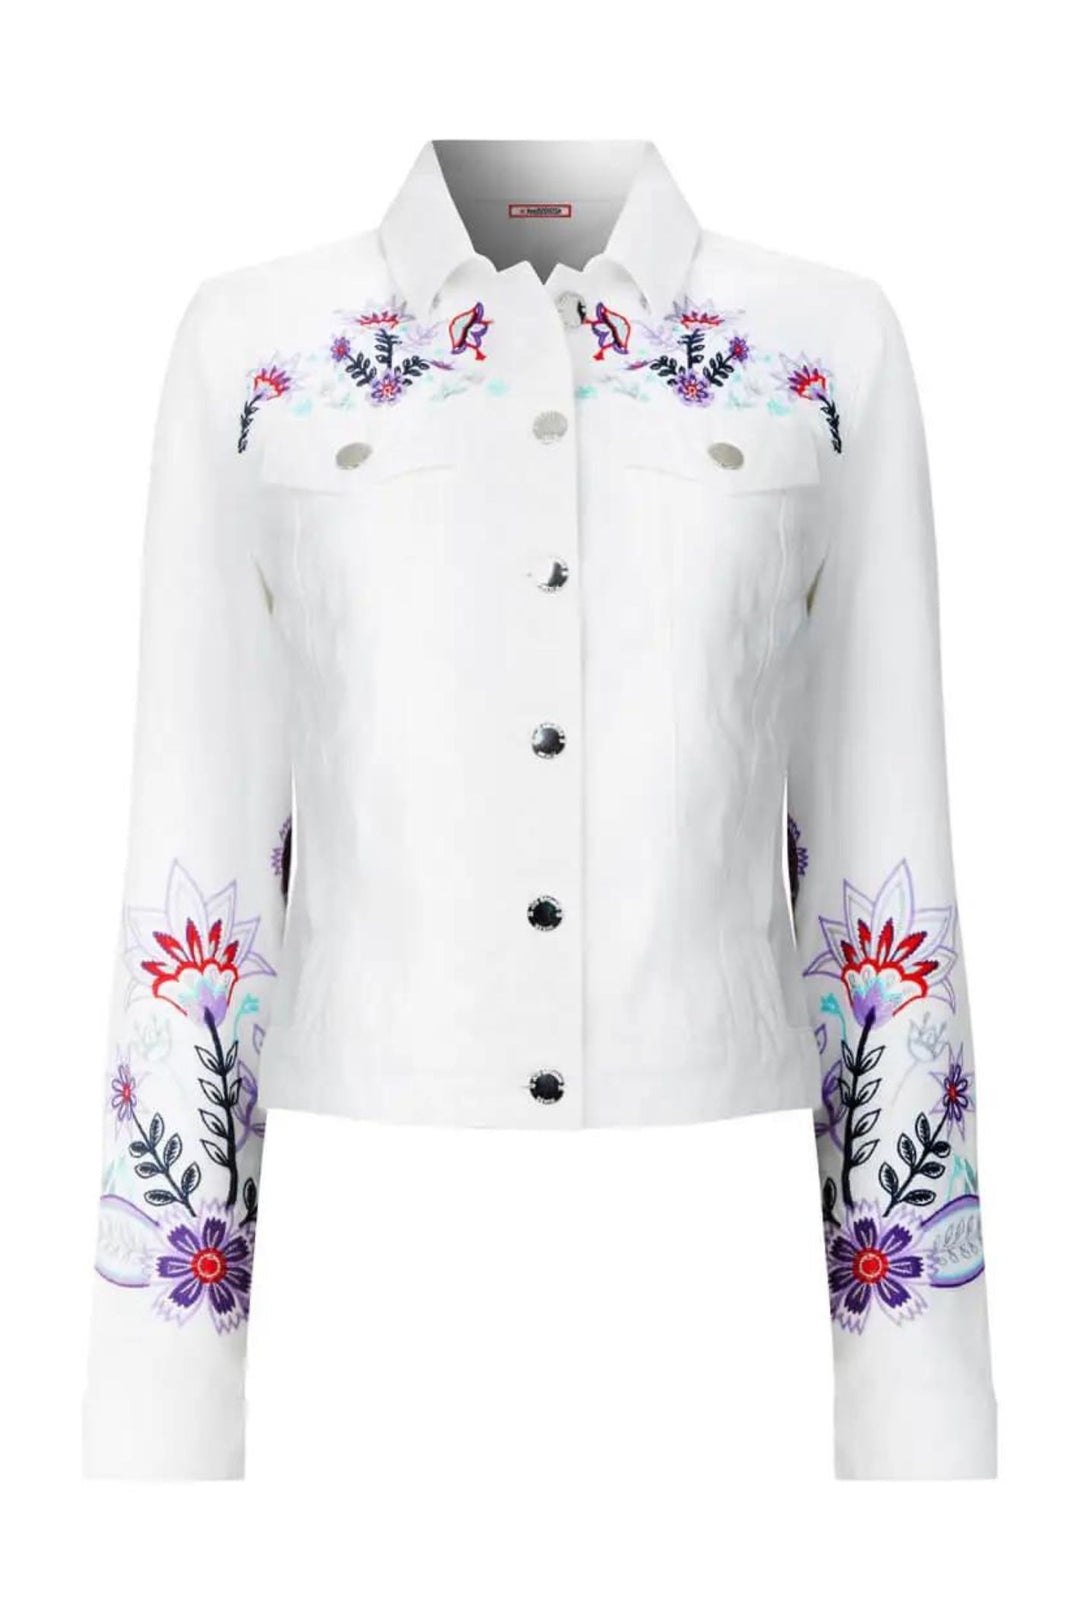 Joe Browns WJ648A Forever Free White Embroidered Jacket